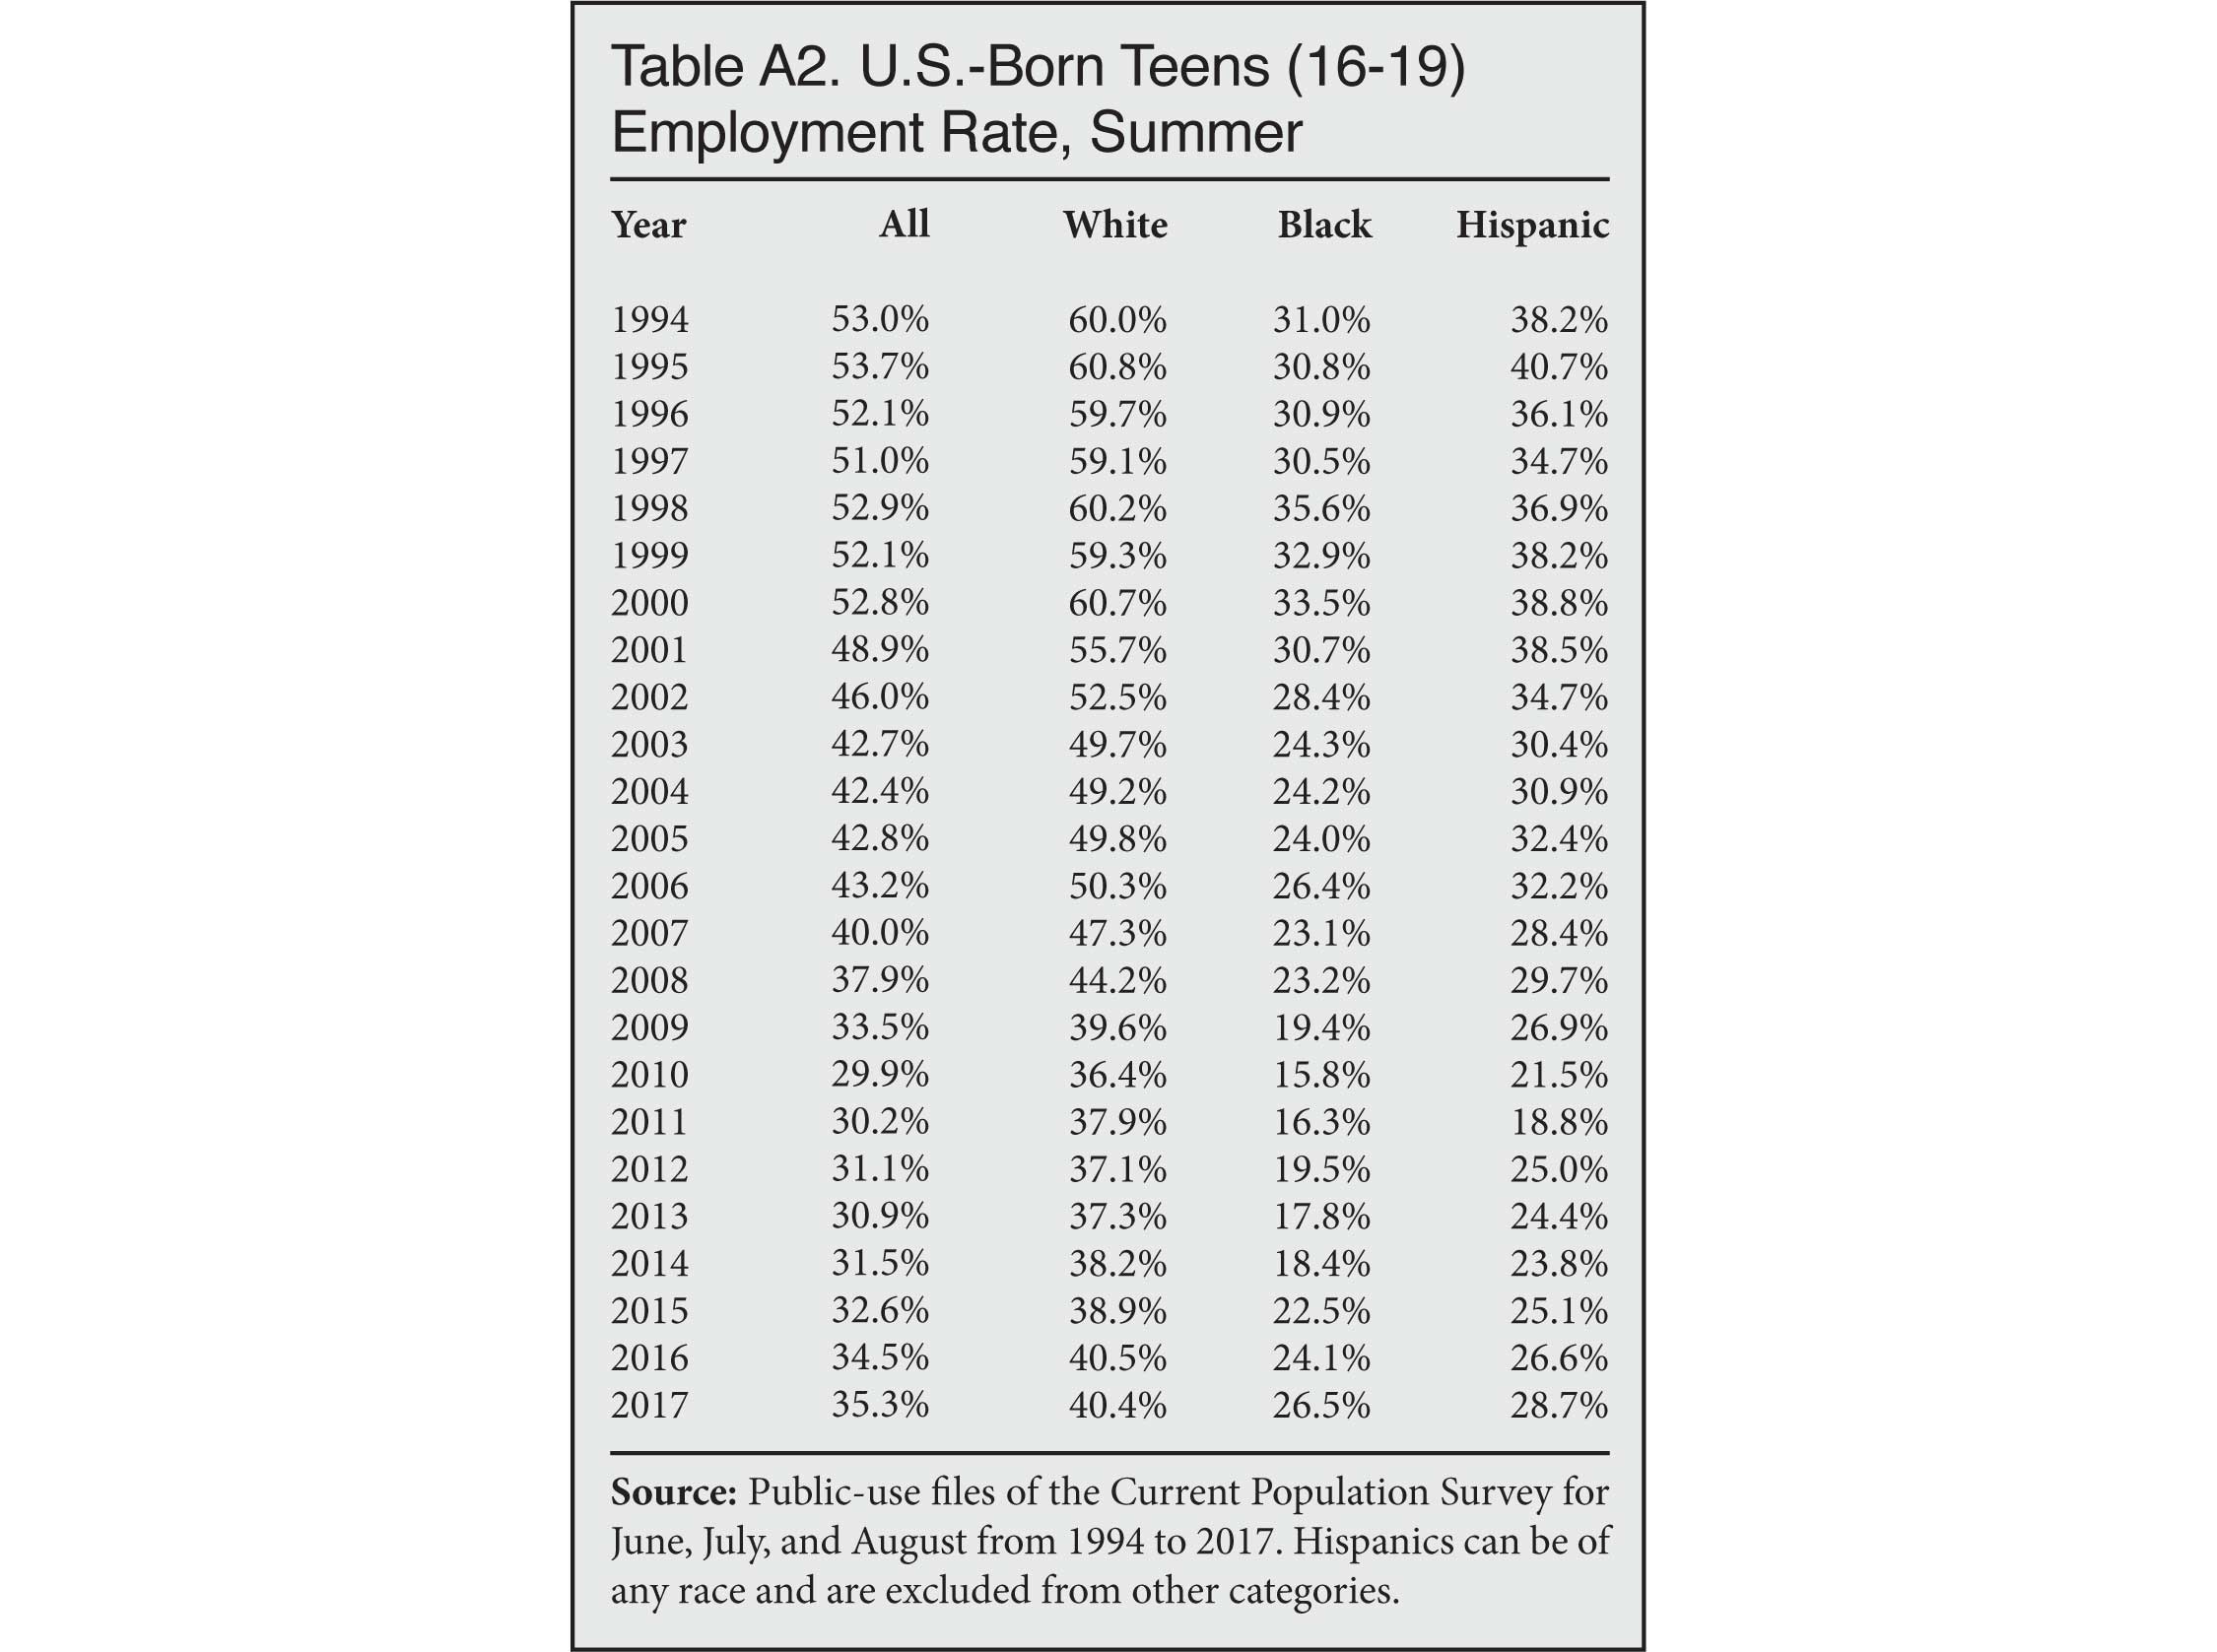 Table: US Born Teens (16-19) Employment Rate, Summer